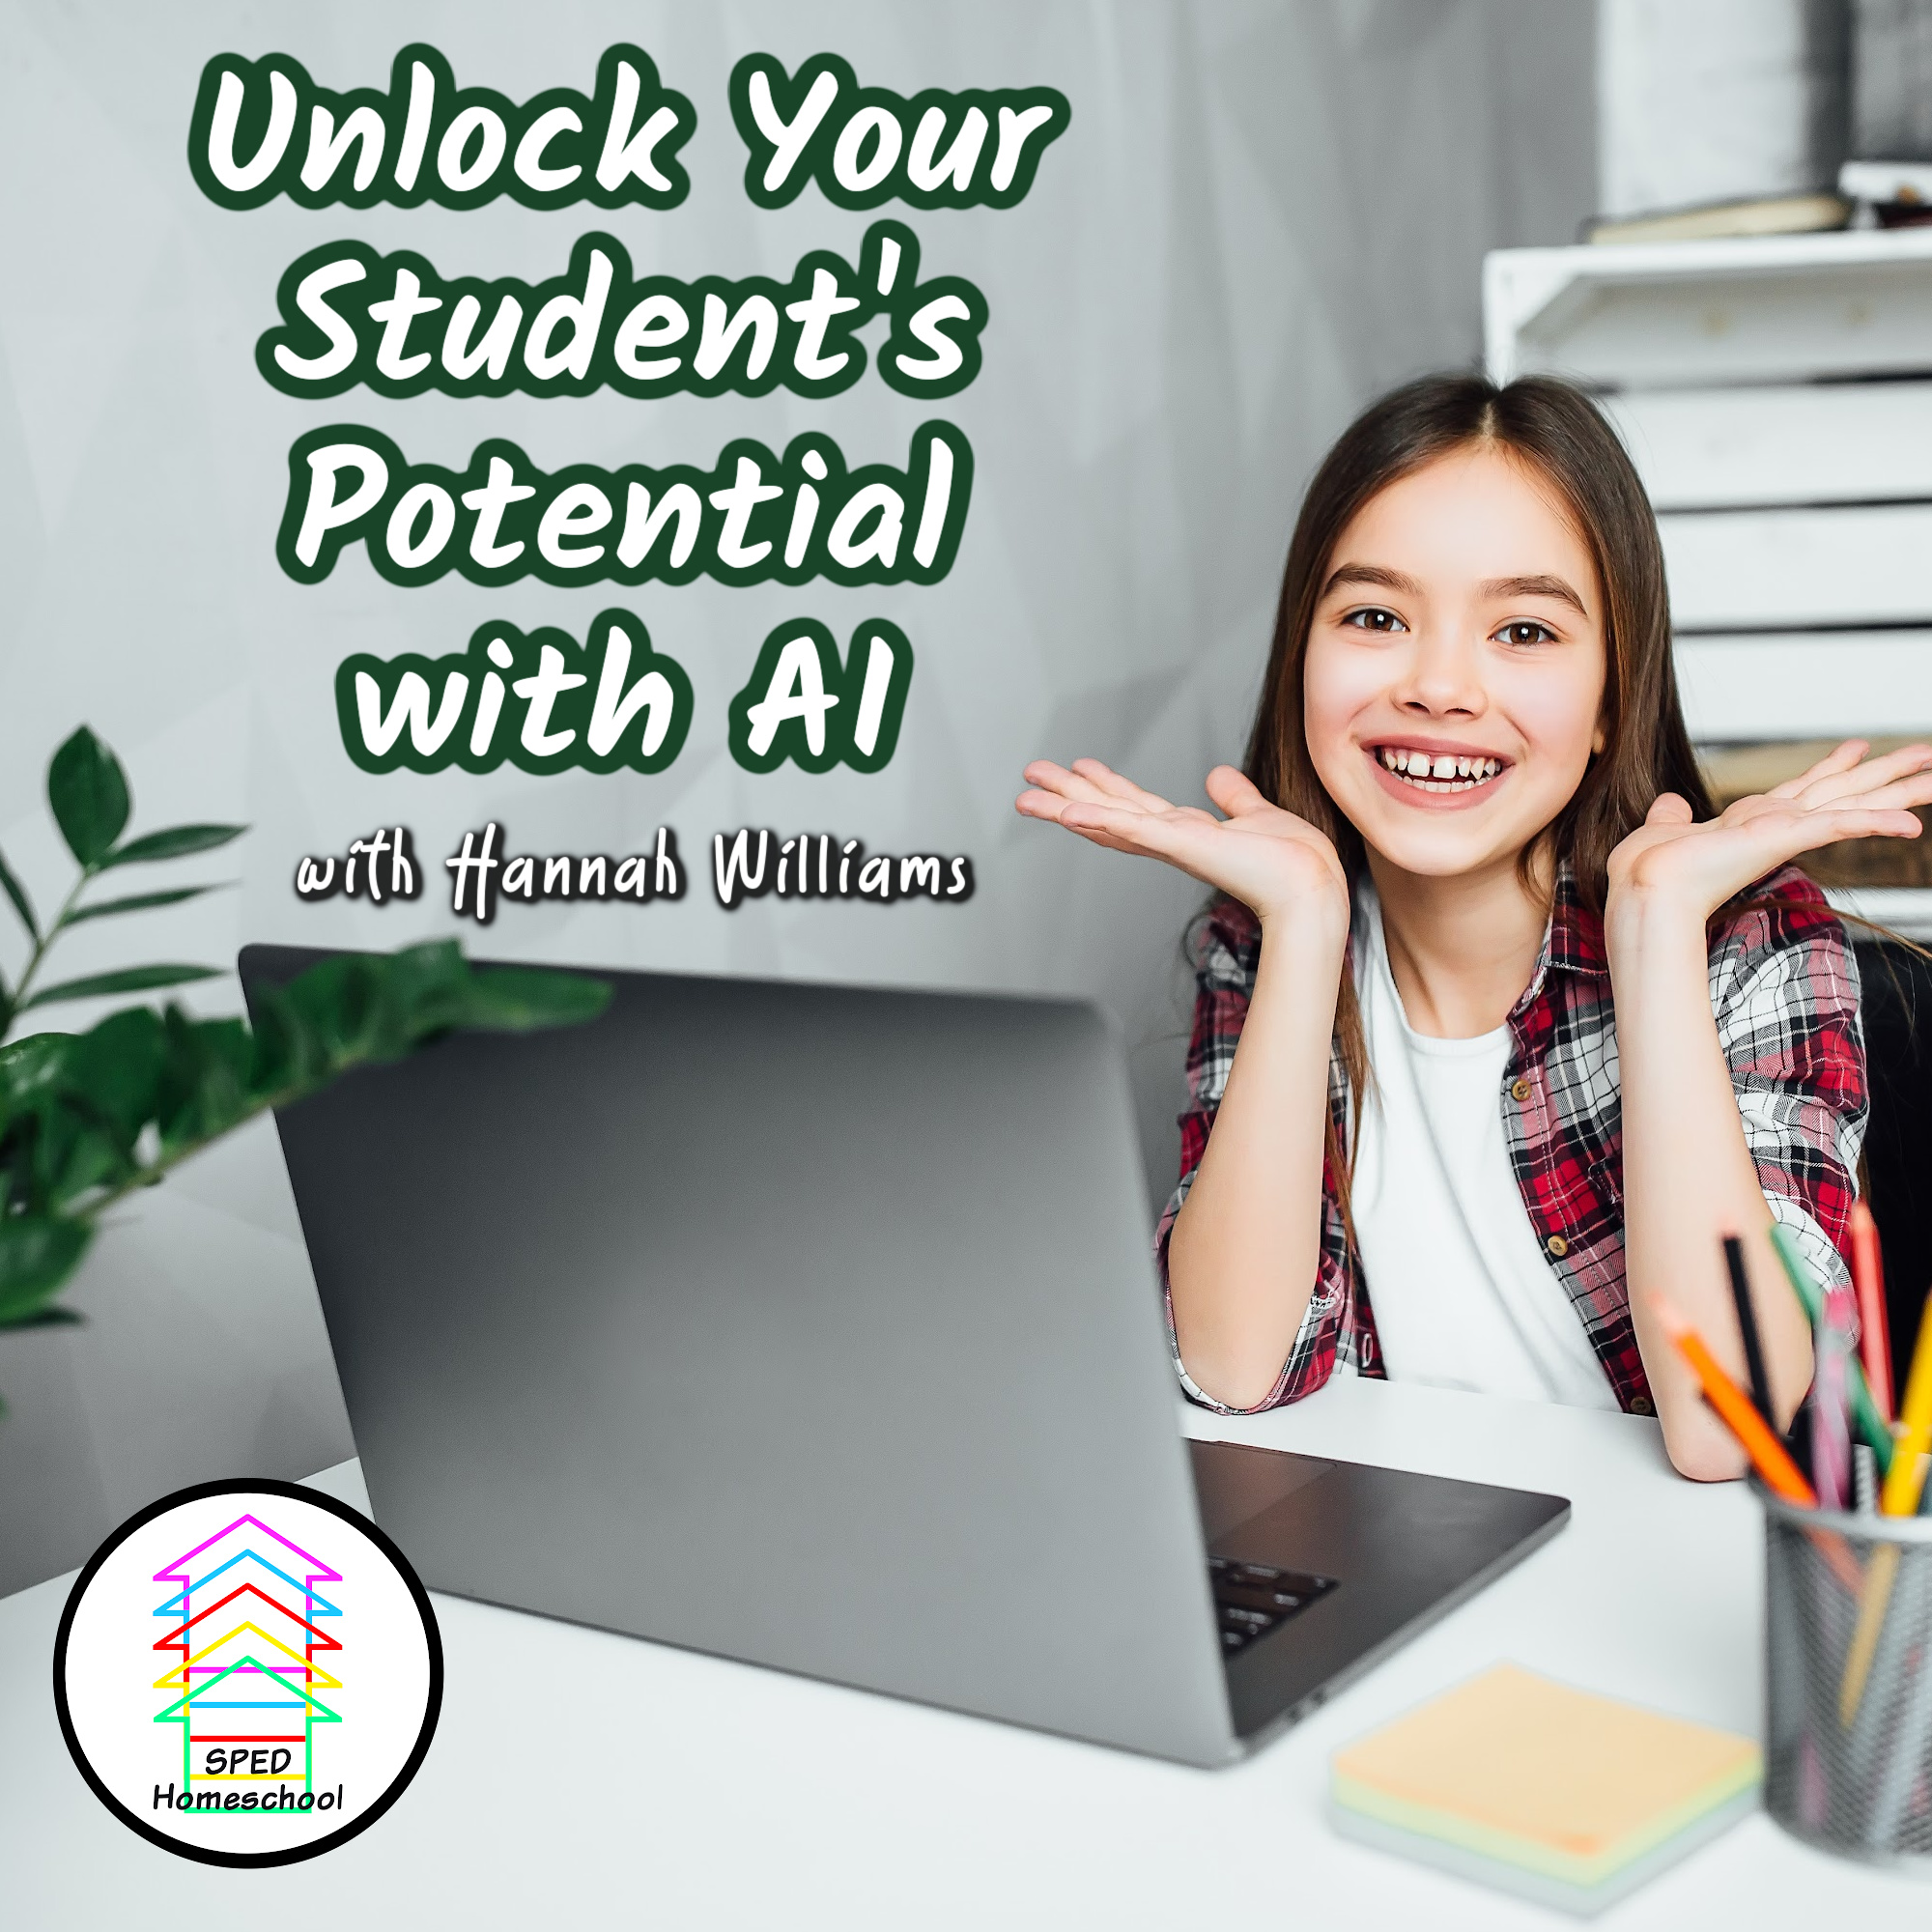 Homeschooling with AI, Part 1: Unlock Your Student’s Potential with AI